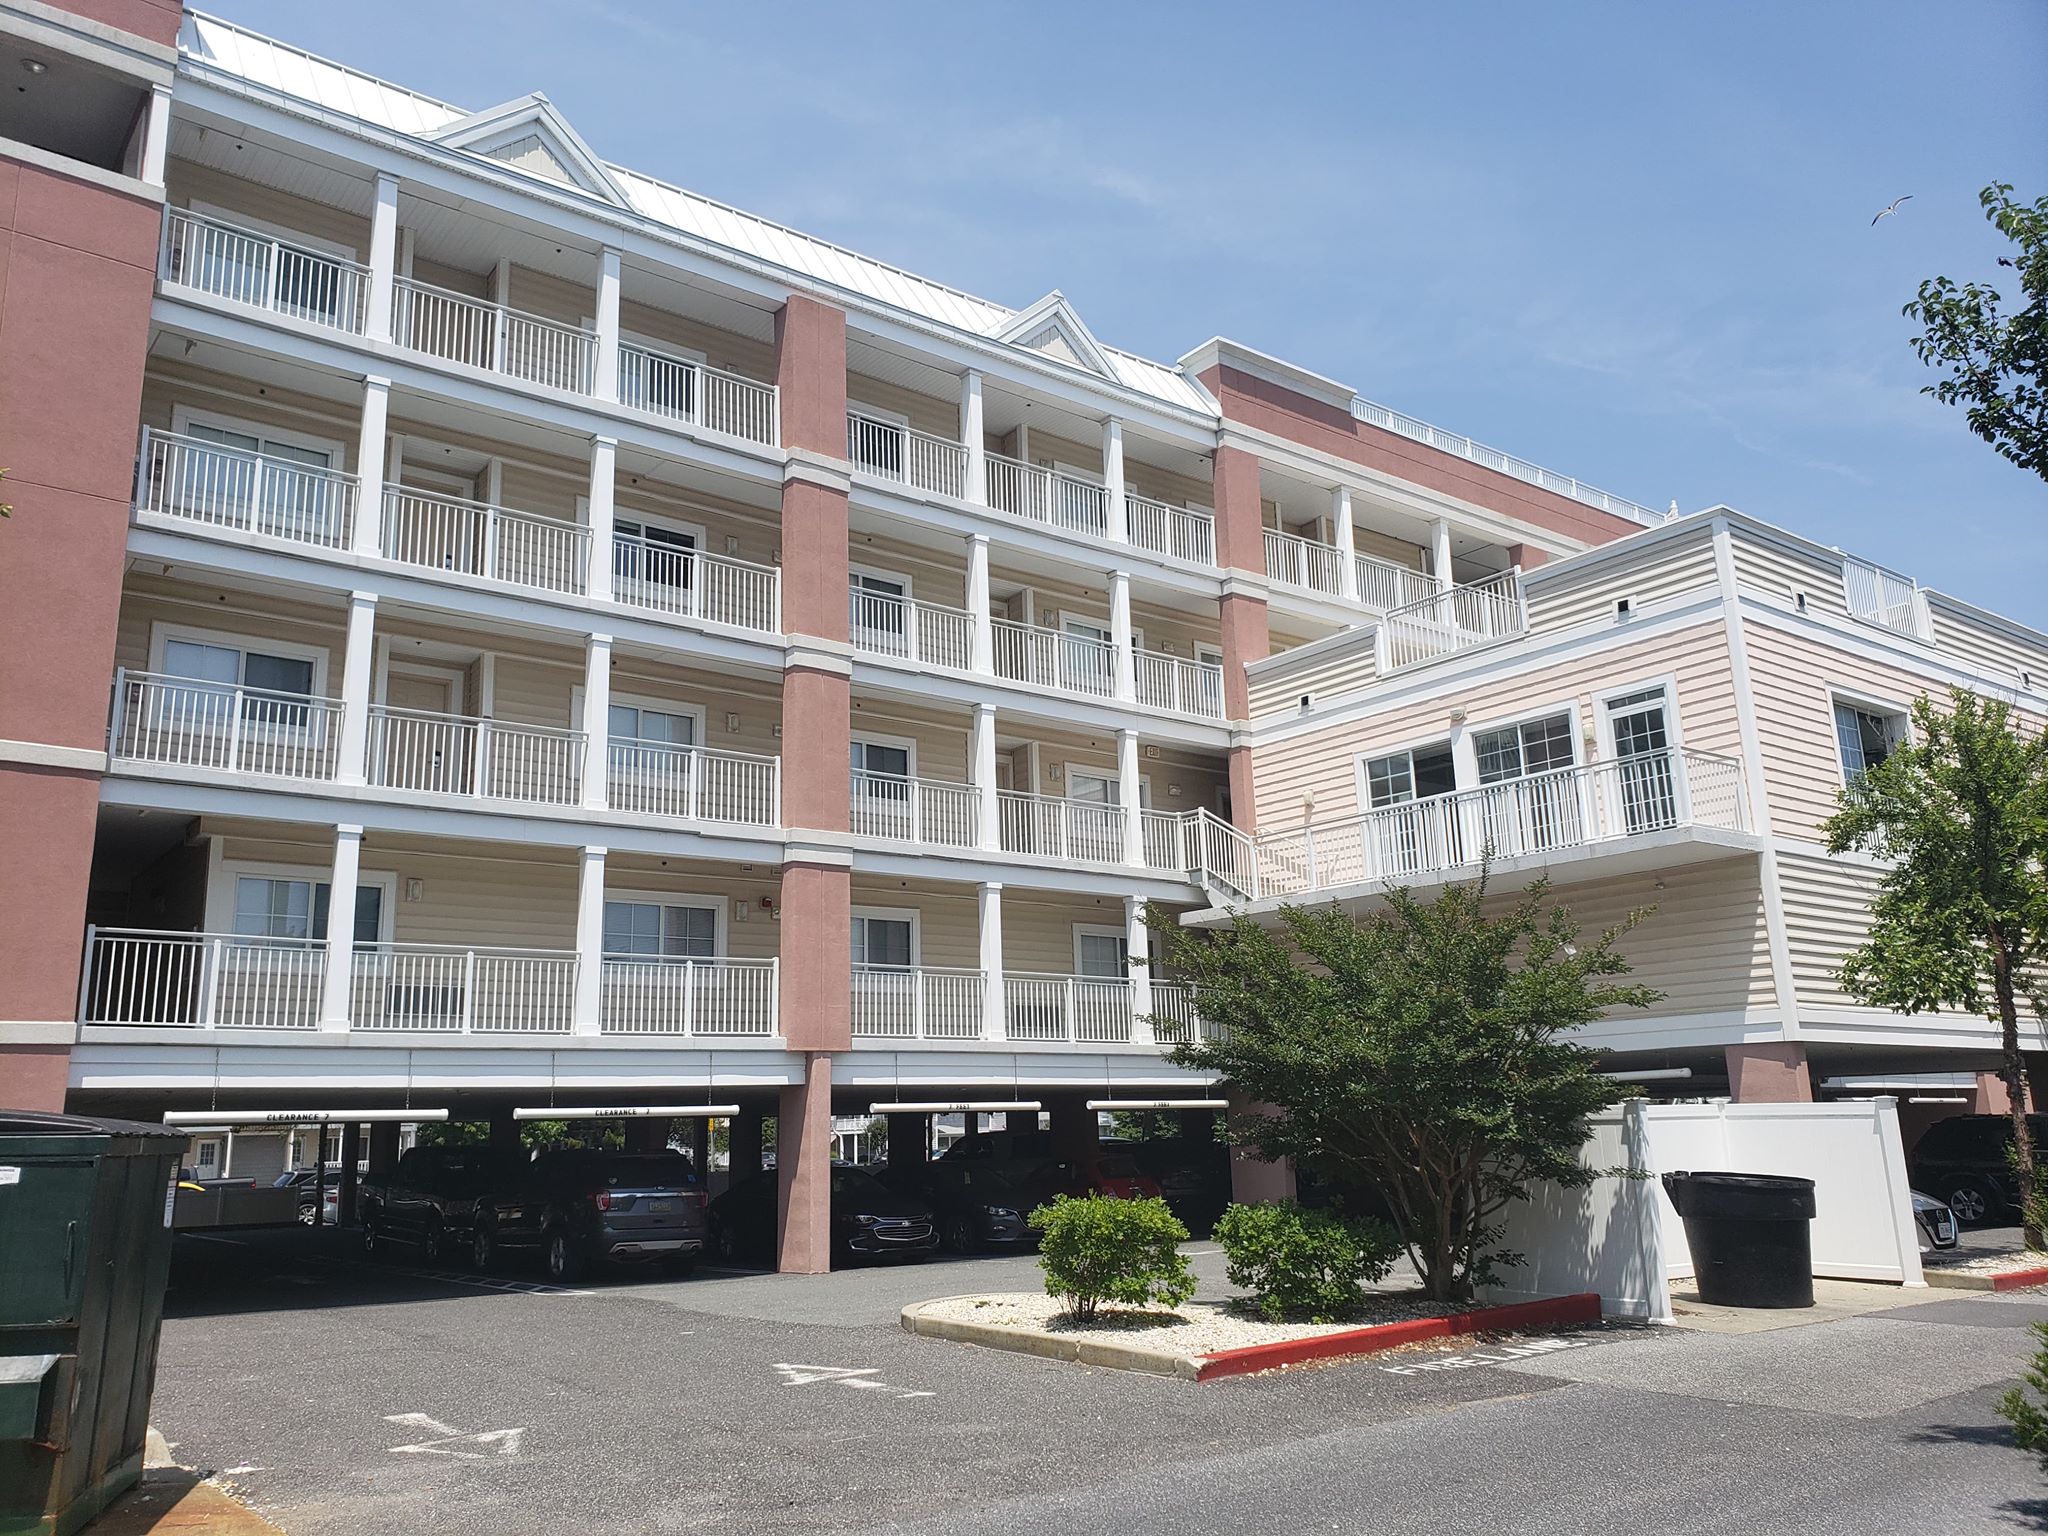 Americana Condos/apartments 10th street | 107 10th St, Ocean City, MD 21842, United States | Phone: (410) 289-6271